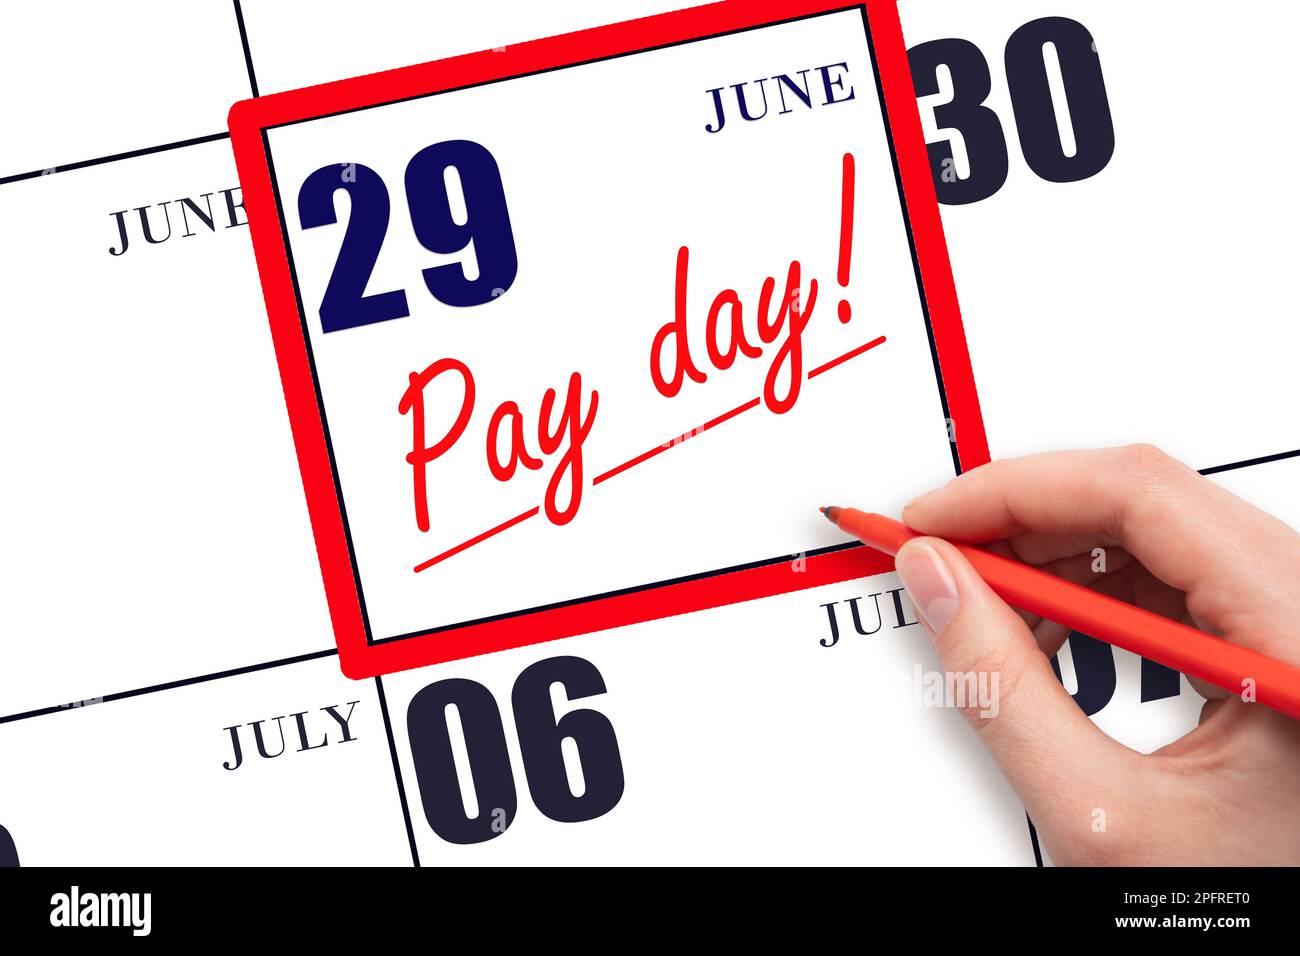 29th day of June. Hand writing text PAY DATE on calendar date June 29 and underline it. Payment due date.  Reminder concept of payment. Summer month, Stock Photo